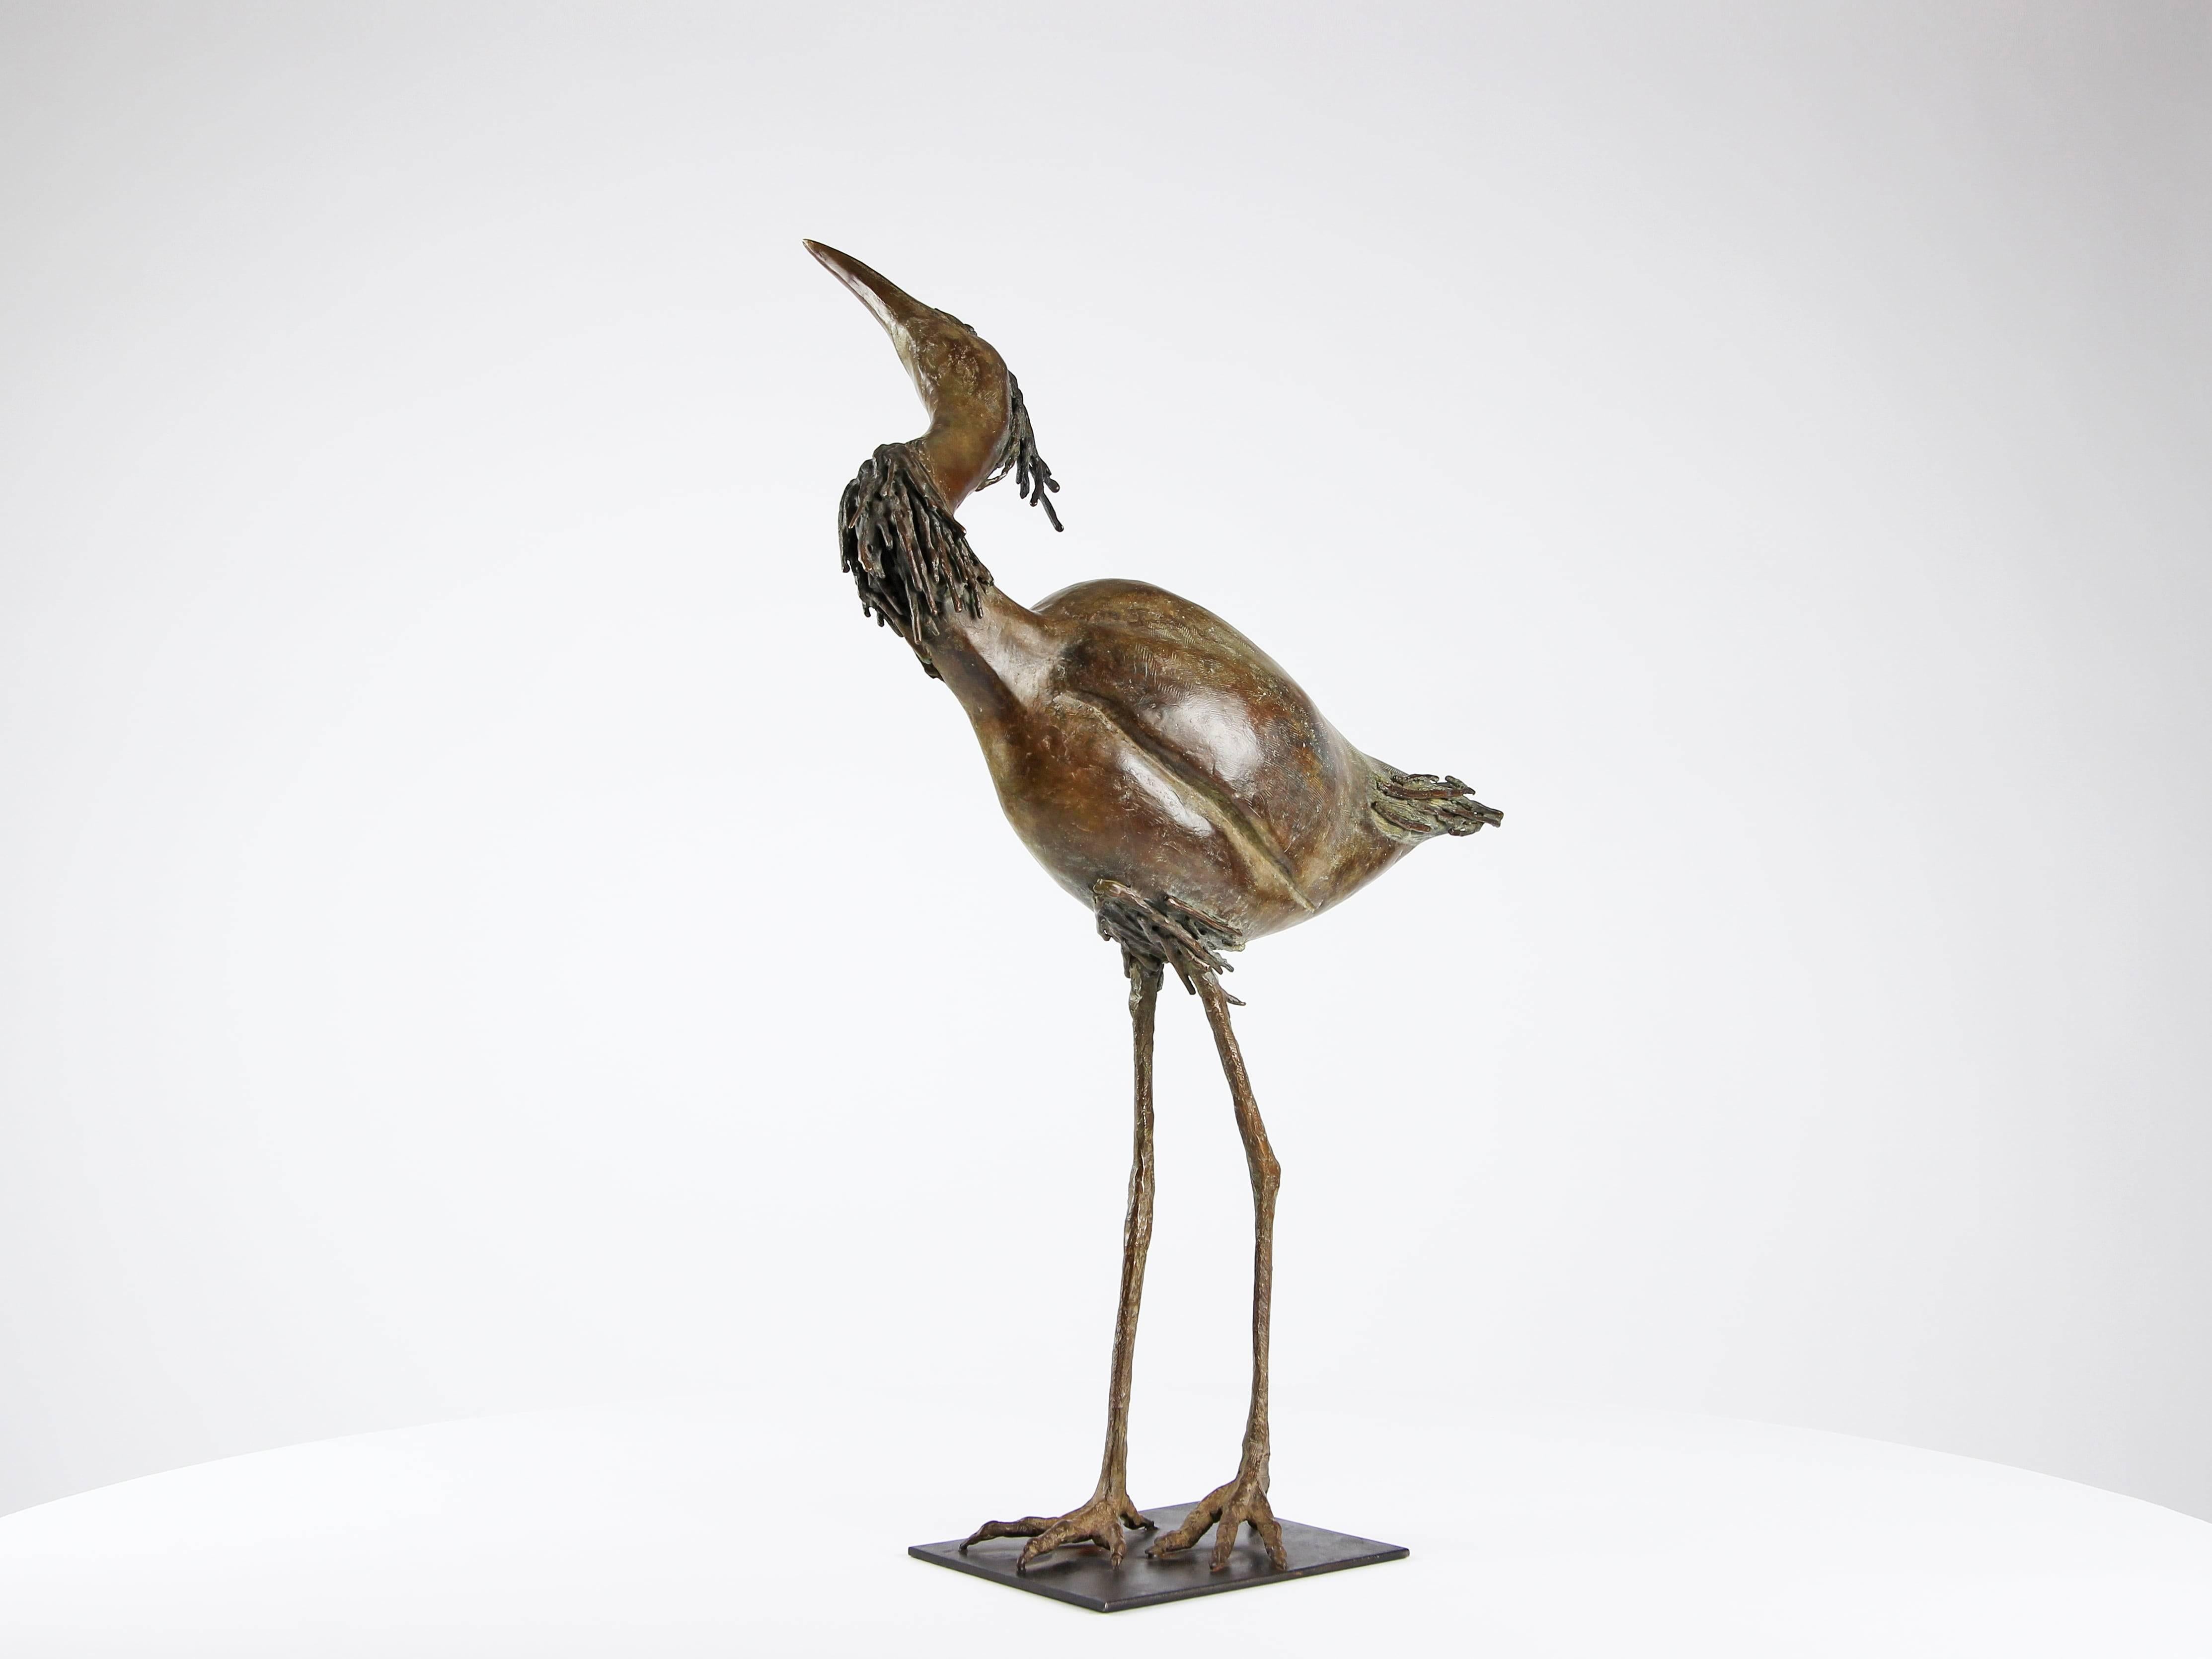 Egret by Chésade - Bronze animal sculpture of a bird, realistic, expressive For Sale 2